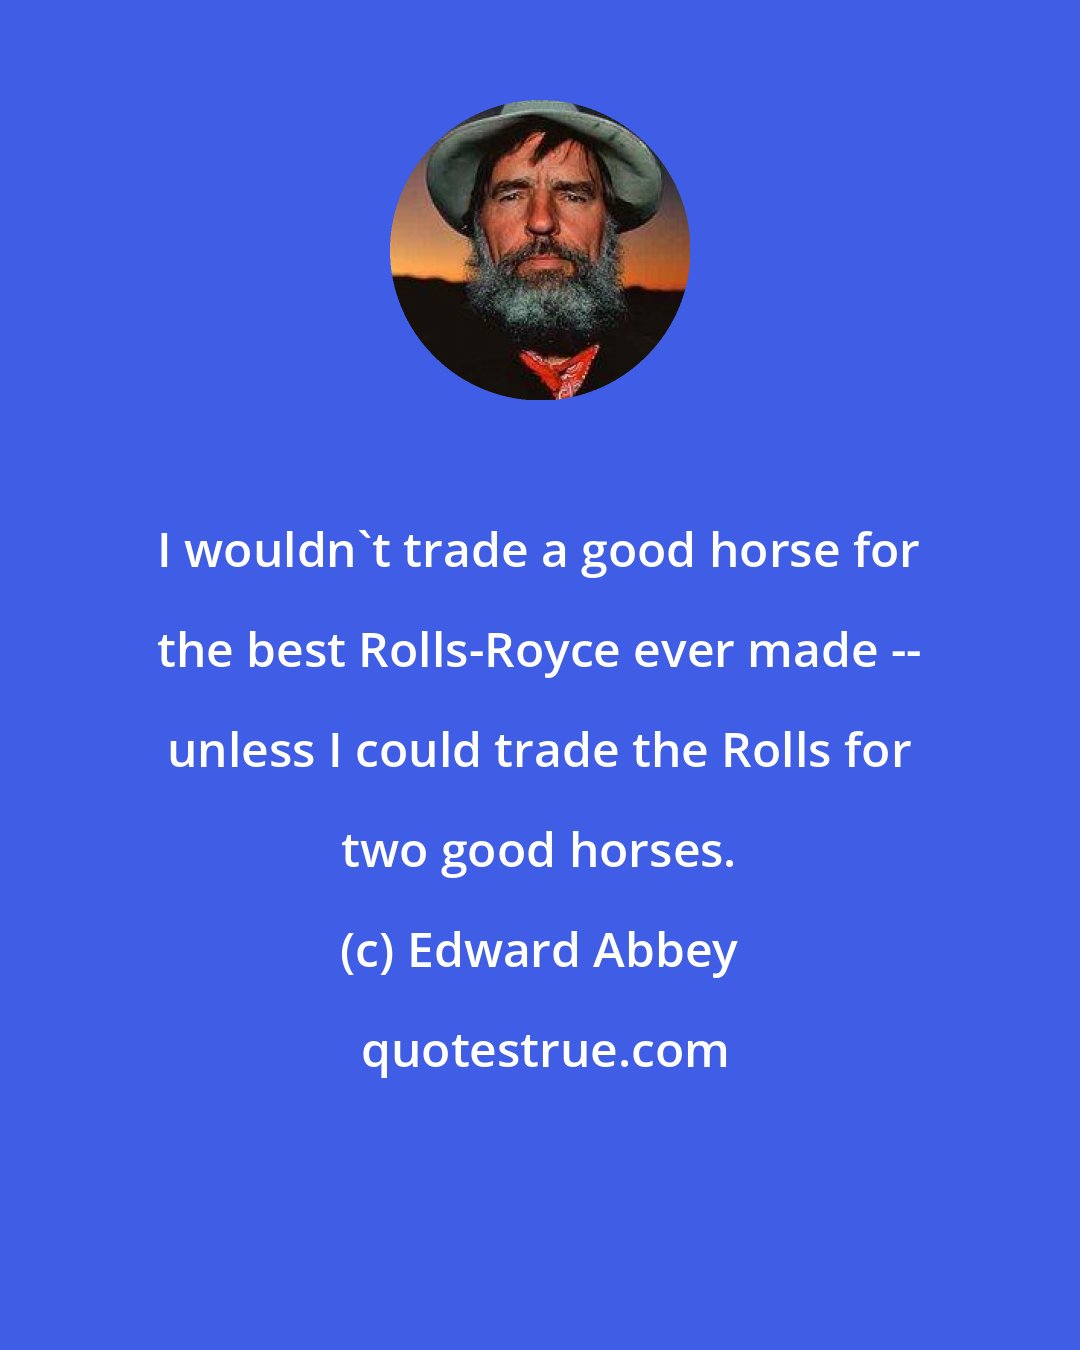 Edward Abbey: I wouldn't trade a good horse for the best Rolls-Royce ever made -- unless I could trade the Rolls for two good horses.